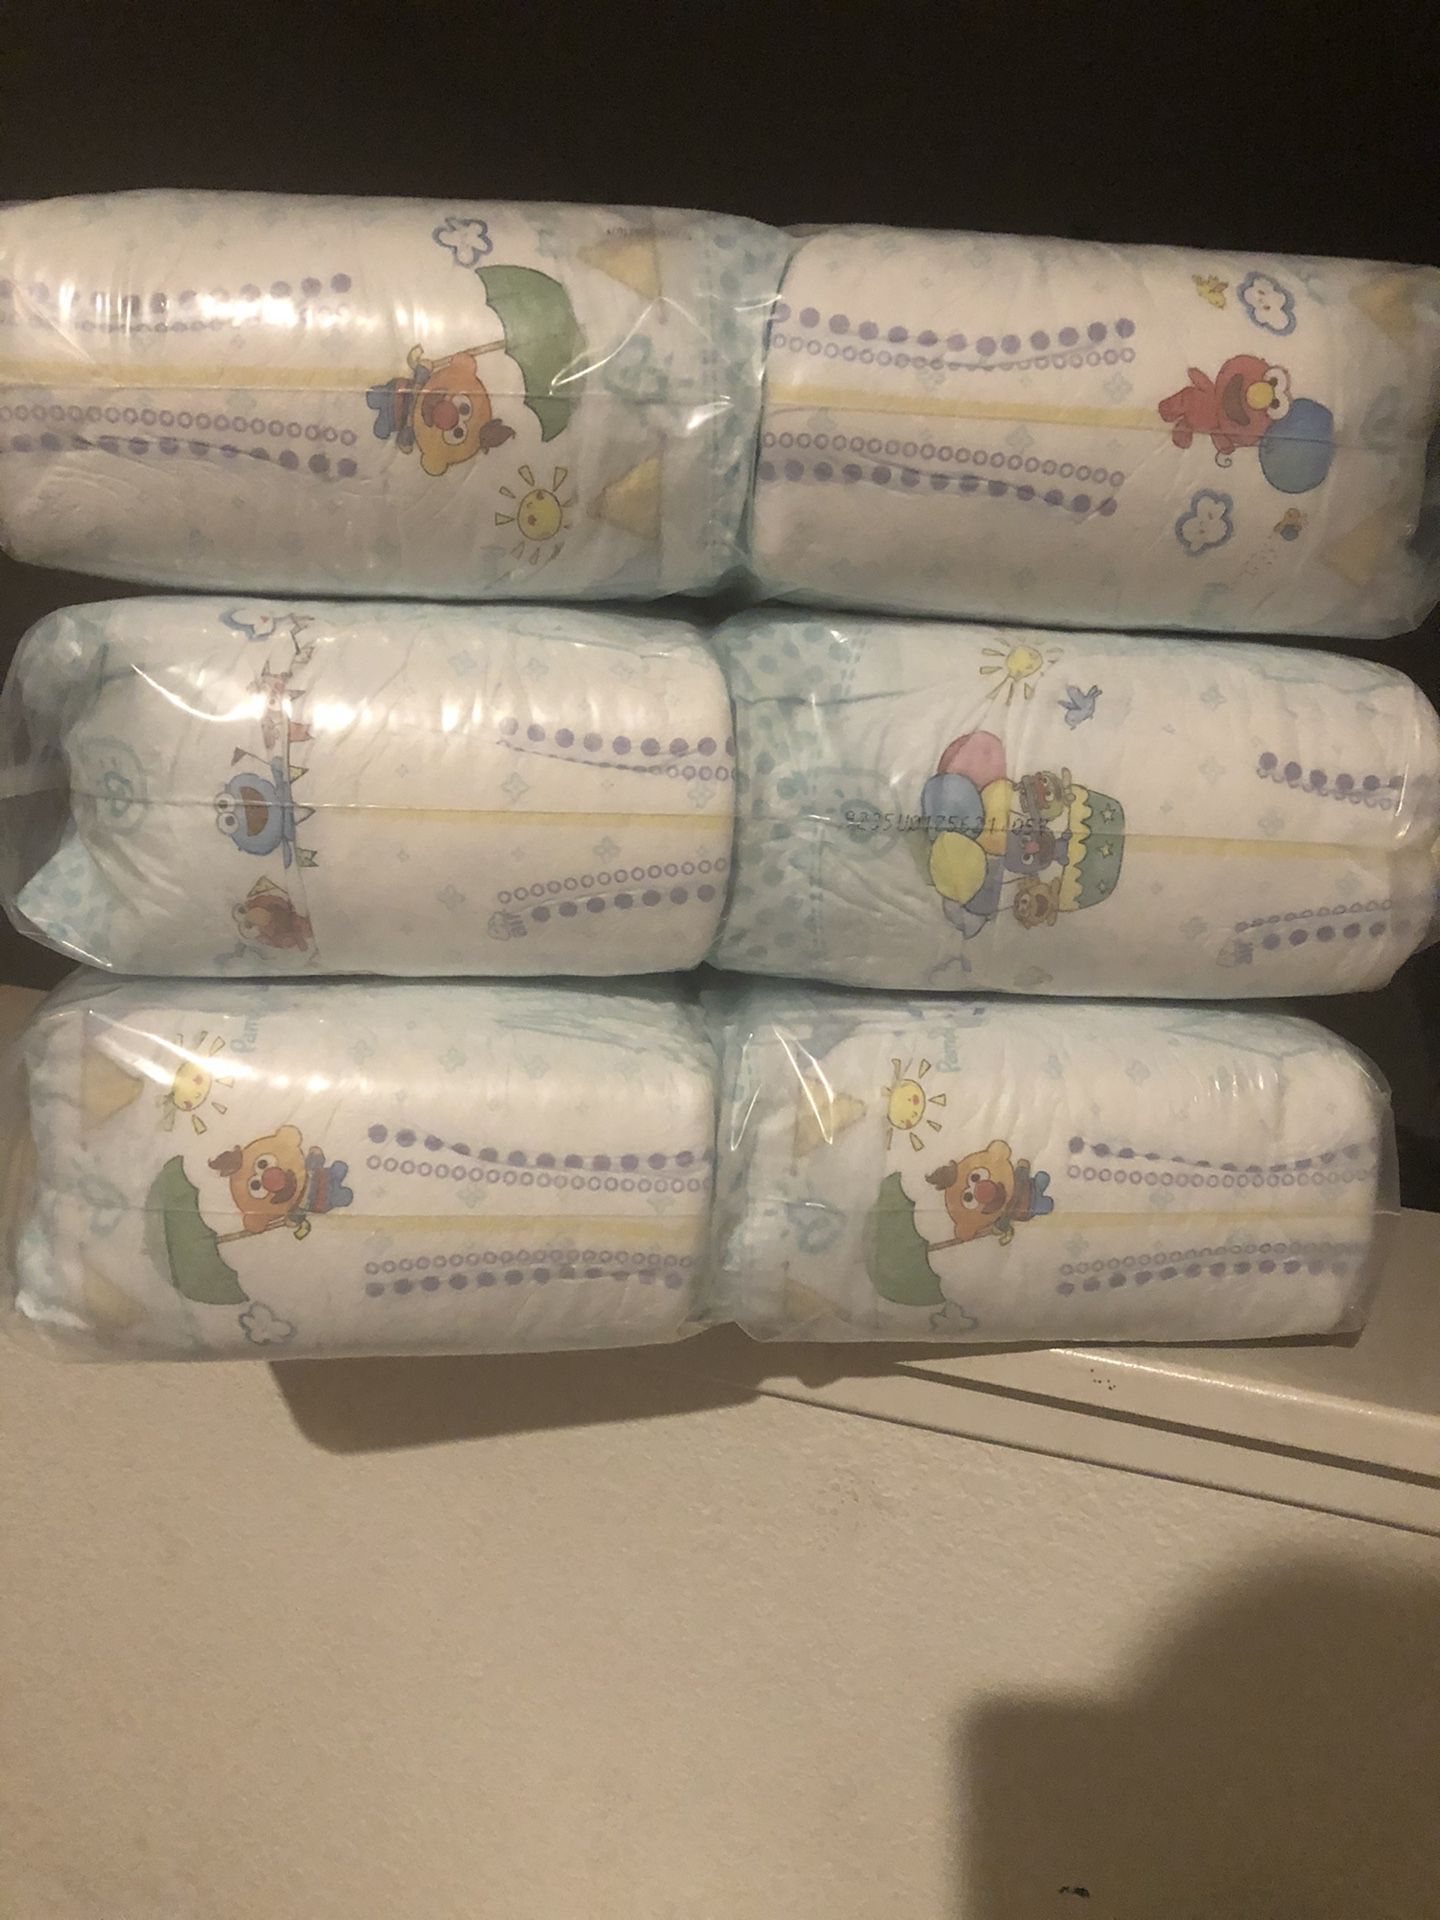 Pampers size 3 (210 count) $30 firm on price